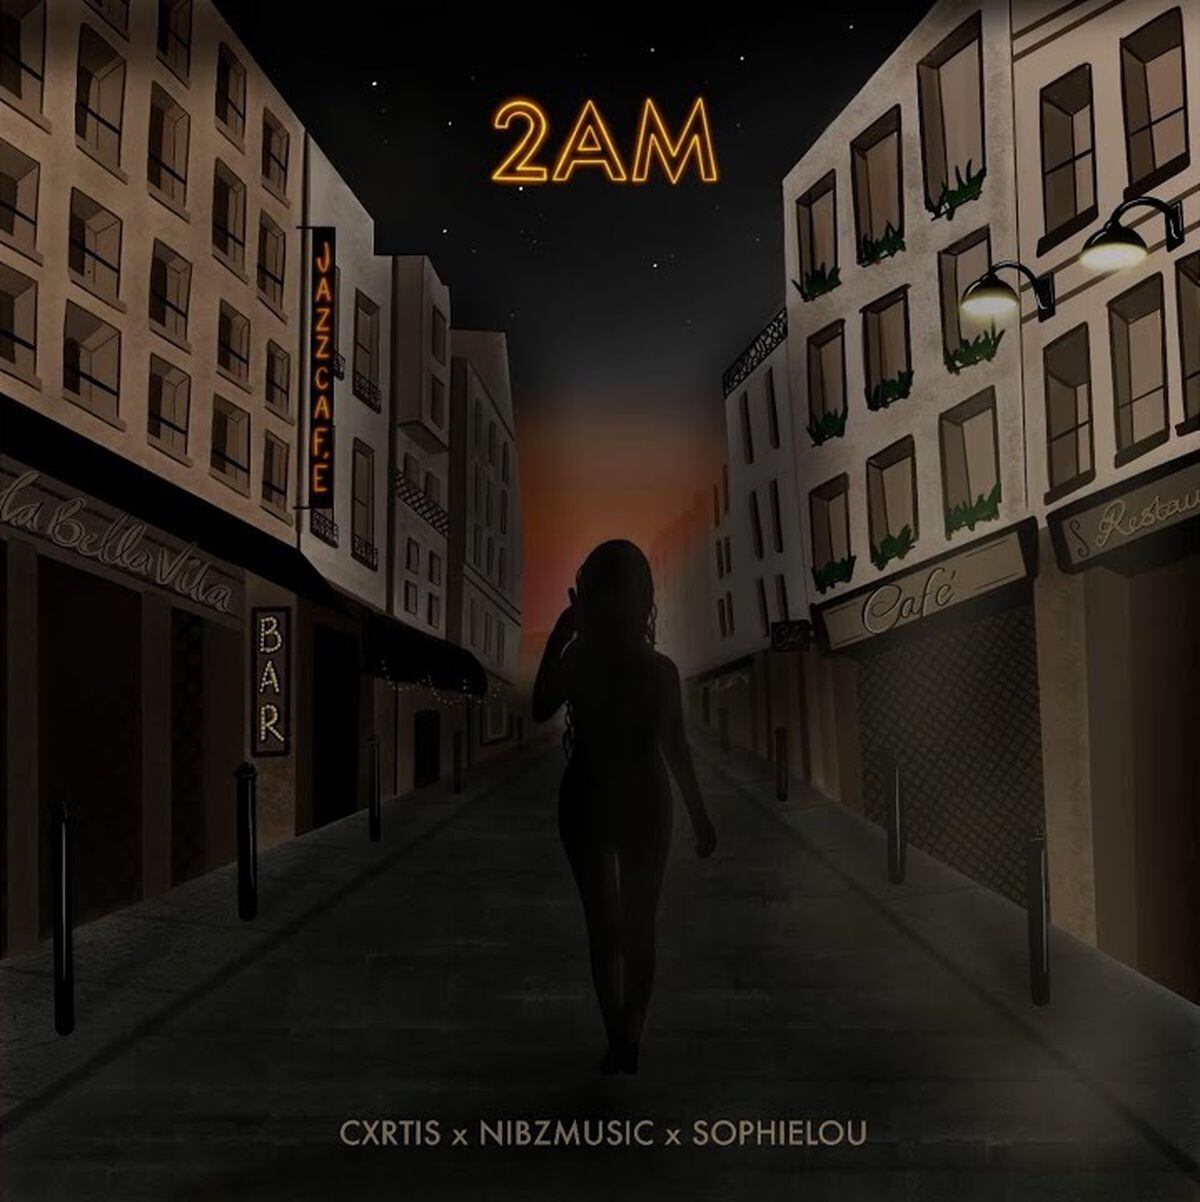 The artwork for 2AM, featuring Wolverhampton's Sophielou